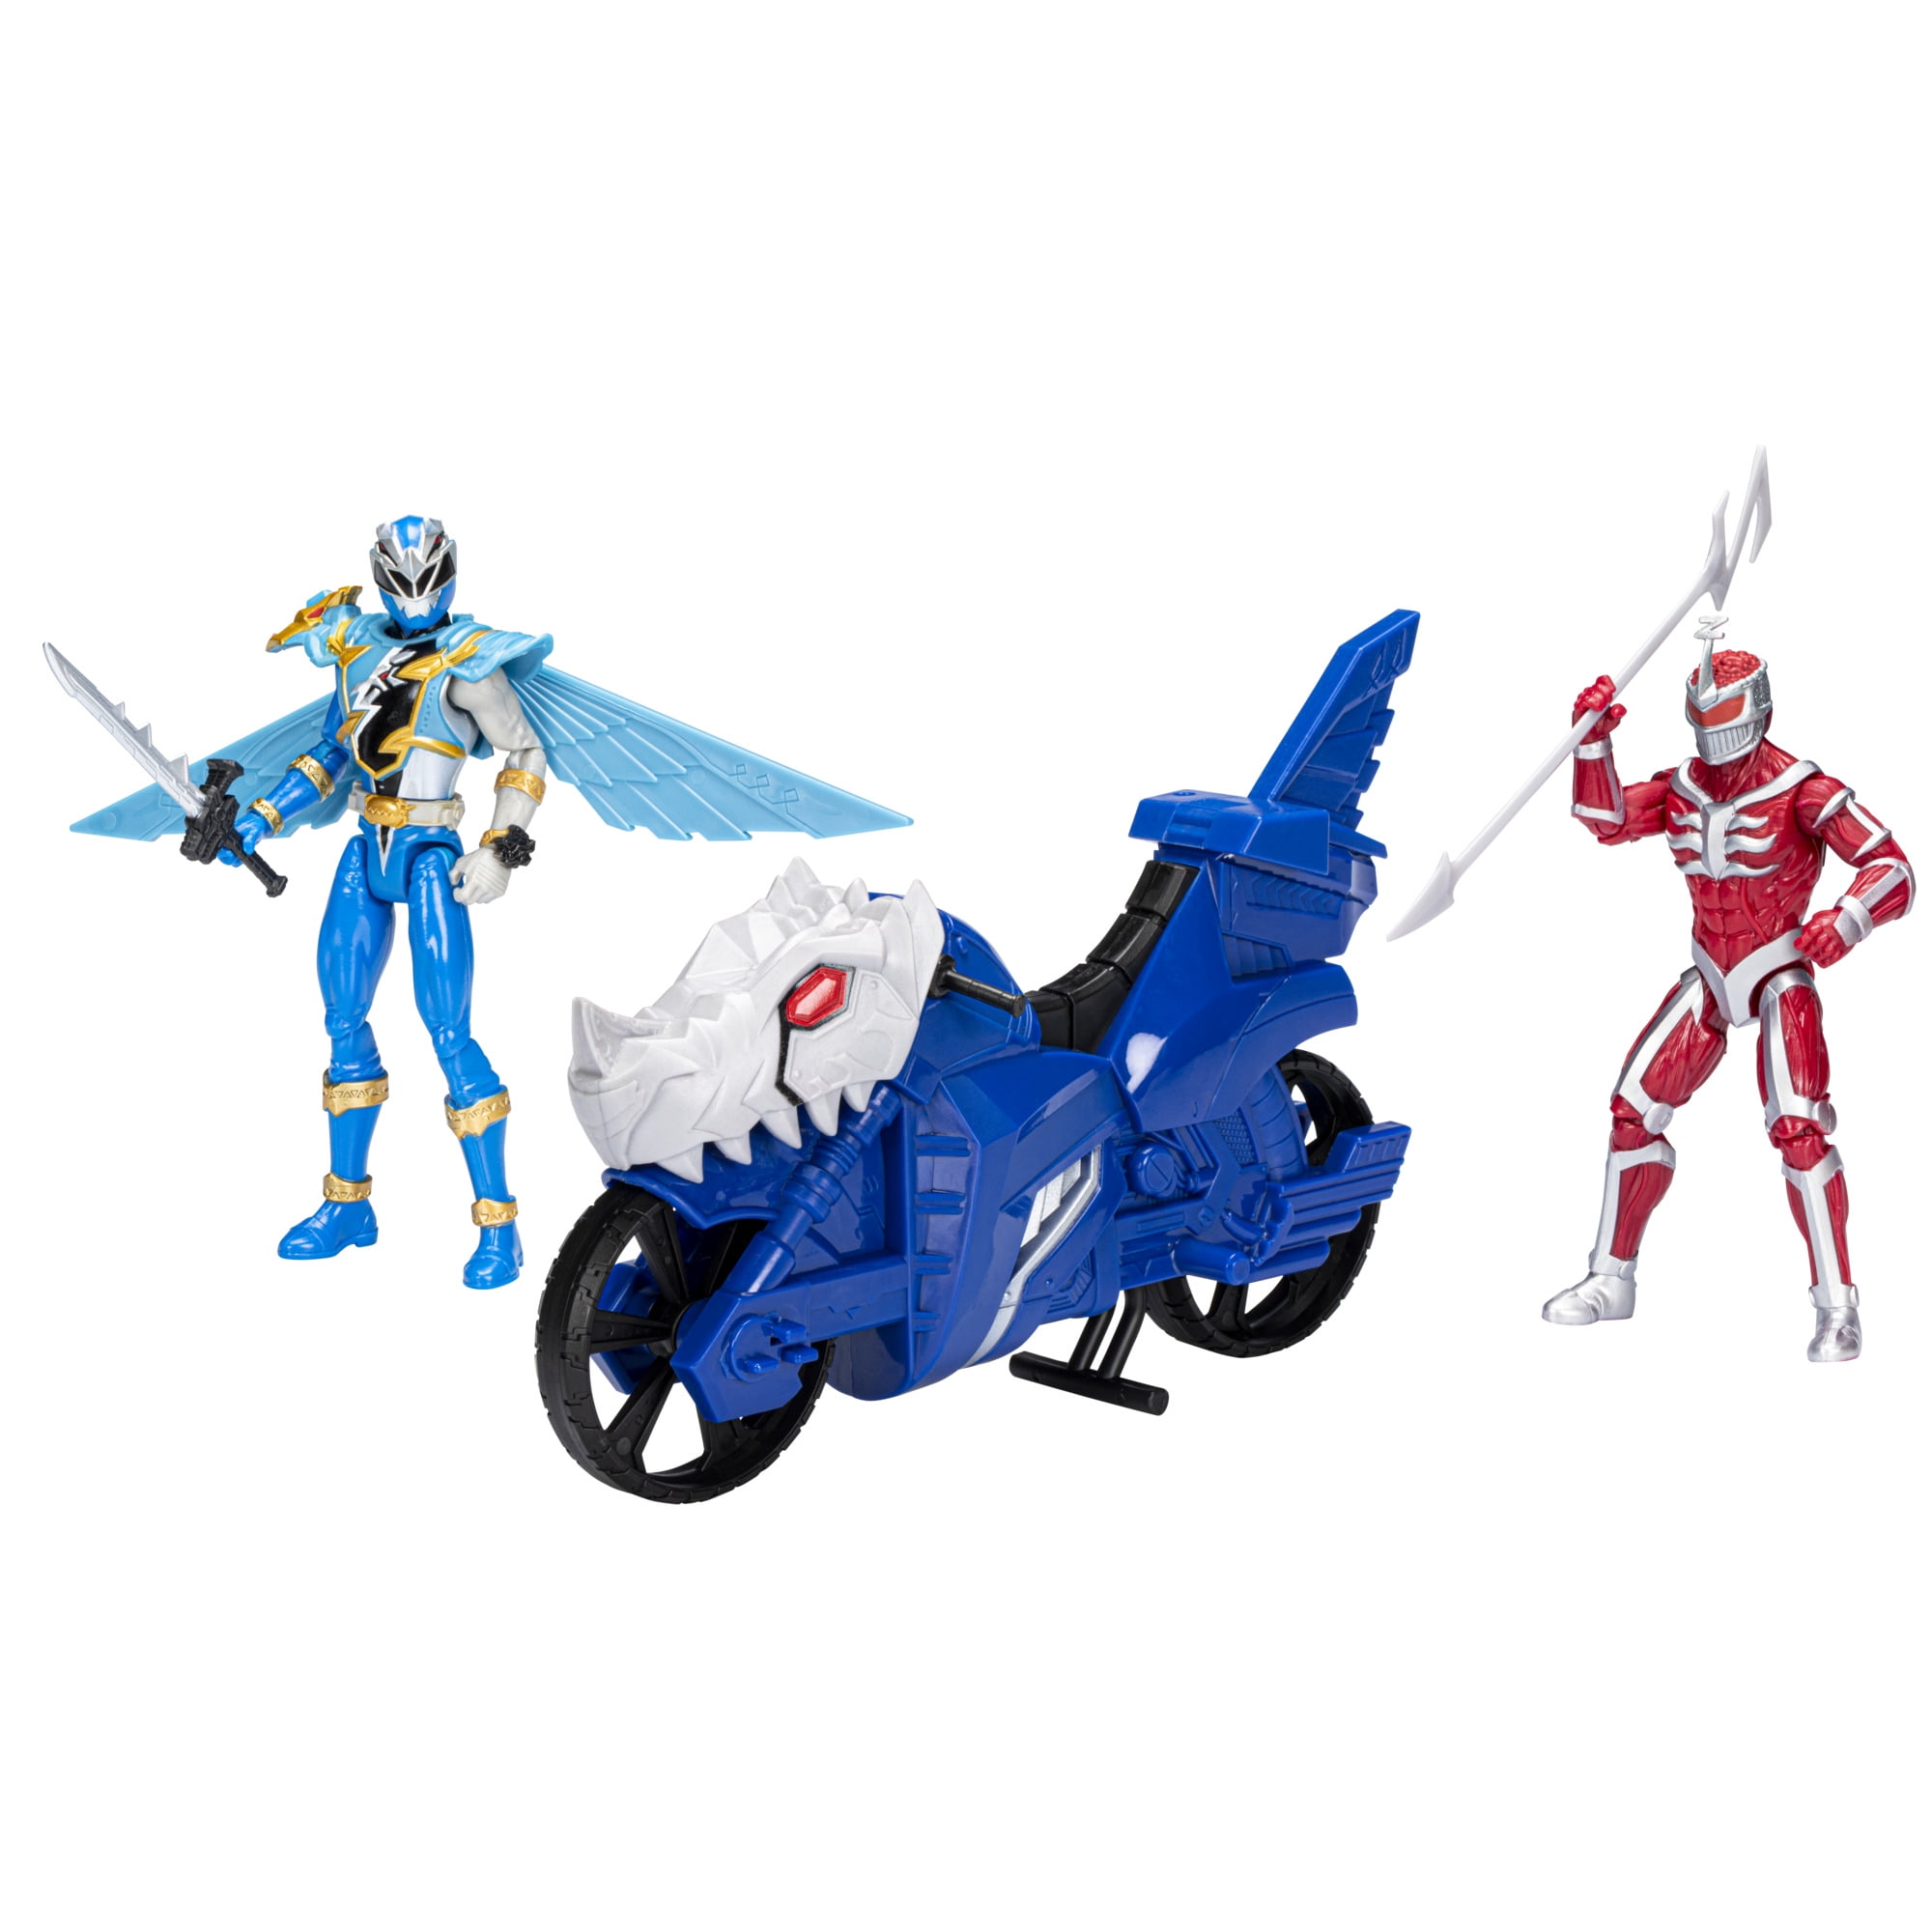 Power Rangers Dino Fury Face-Off Pack Blue Ranger and Vehicle vs Lord Zedd 2-Pack Action Figure